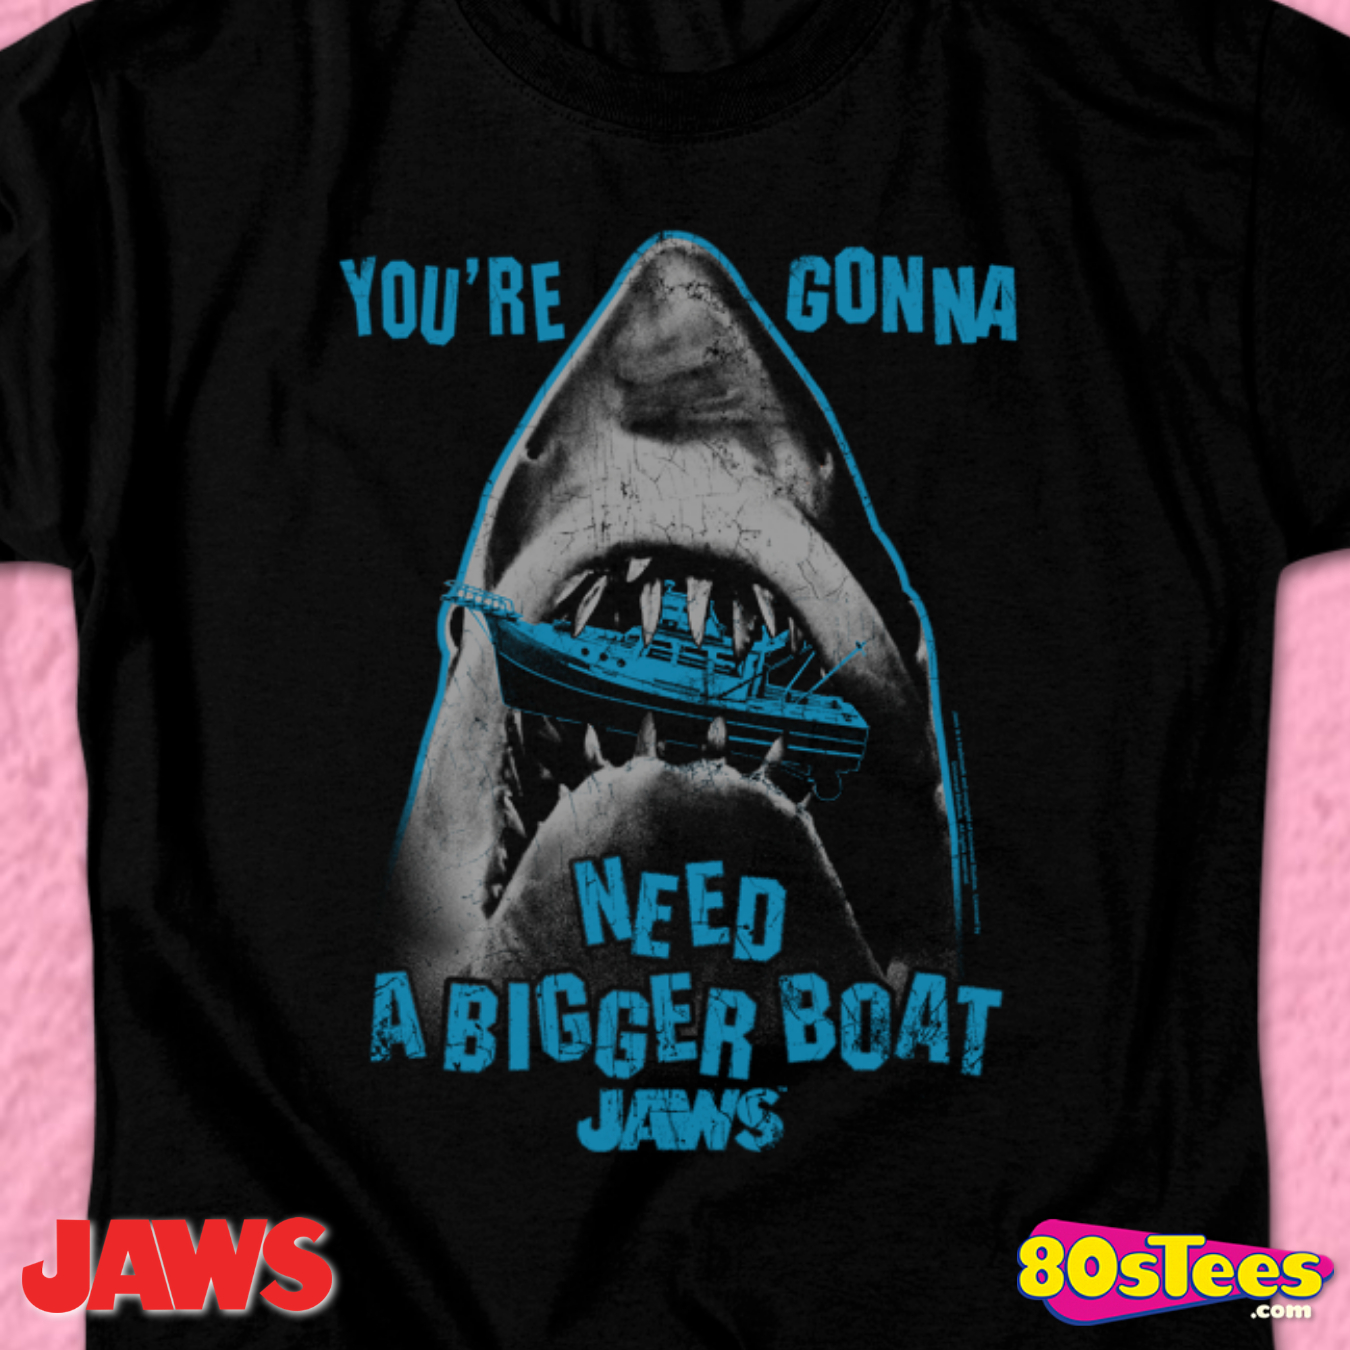 'Gonna Need a Bigger Boat' Movie T-Shirt Inspired by Jaws